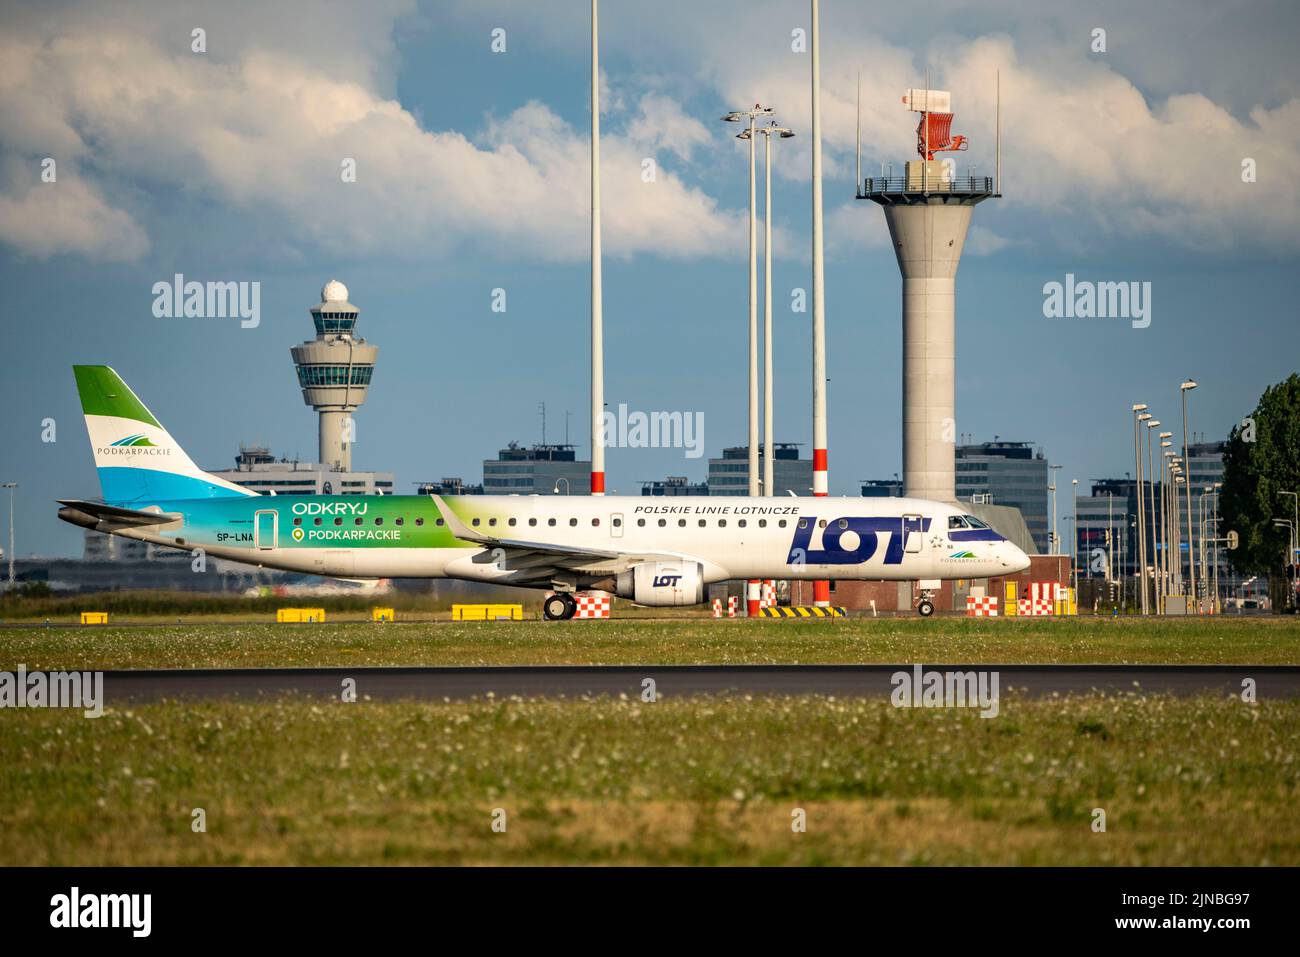 Amsterdam Shiphol Airport, Polderbaan, one of 6 runways, tower air traffic control, taxiway to take-off, SP-LNA, LOT - Polish Airlines Embraer ERJ-195 Stock Photo